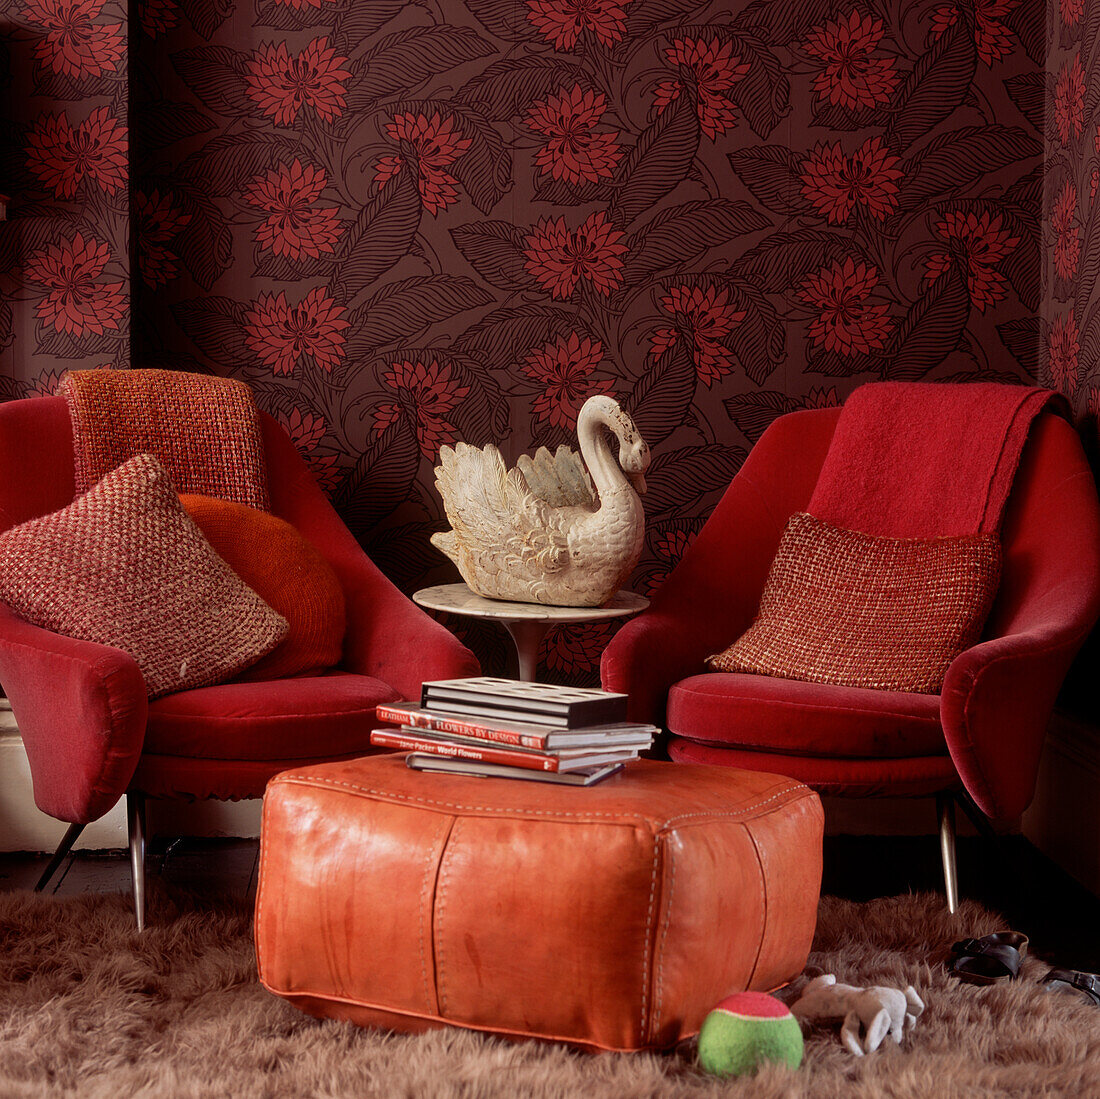 Upholstered armchairs and leather floor cushion on shag pile rug with dark floral wallpaper and a swan vase